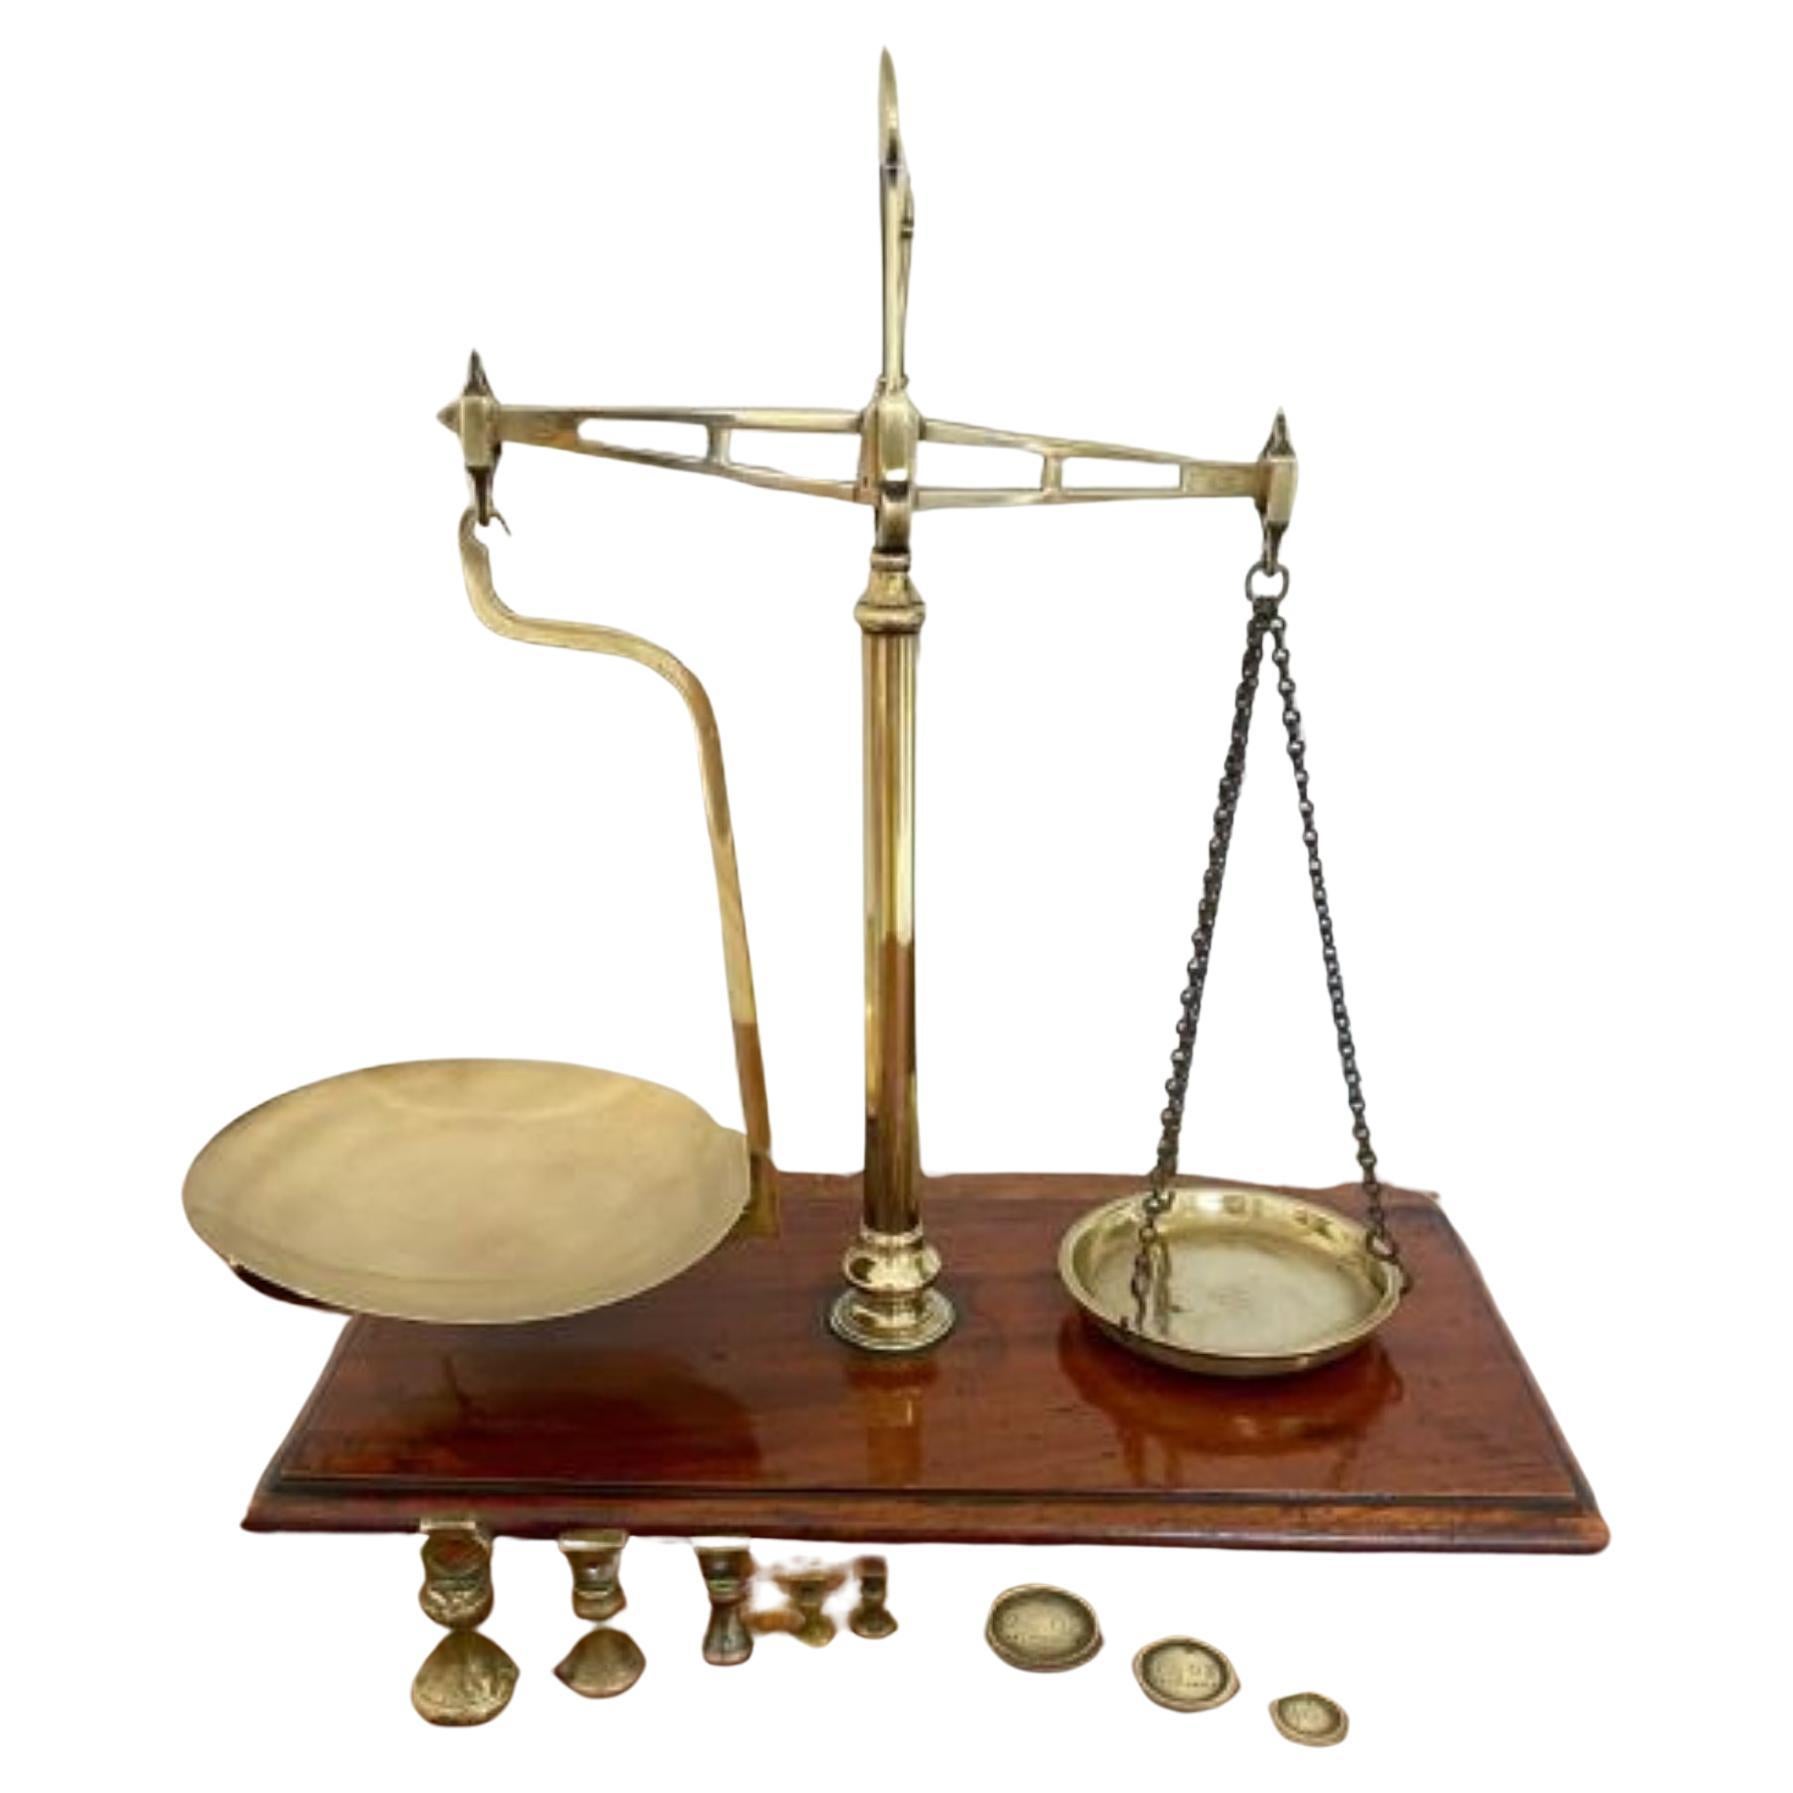 Quality pair of early Victorian 19th century shop scales For Sale